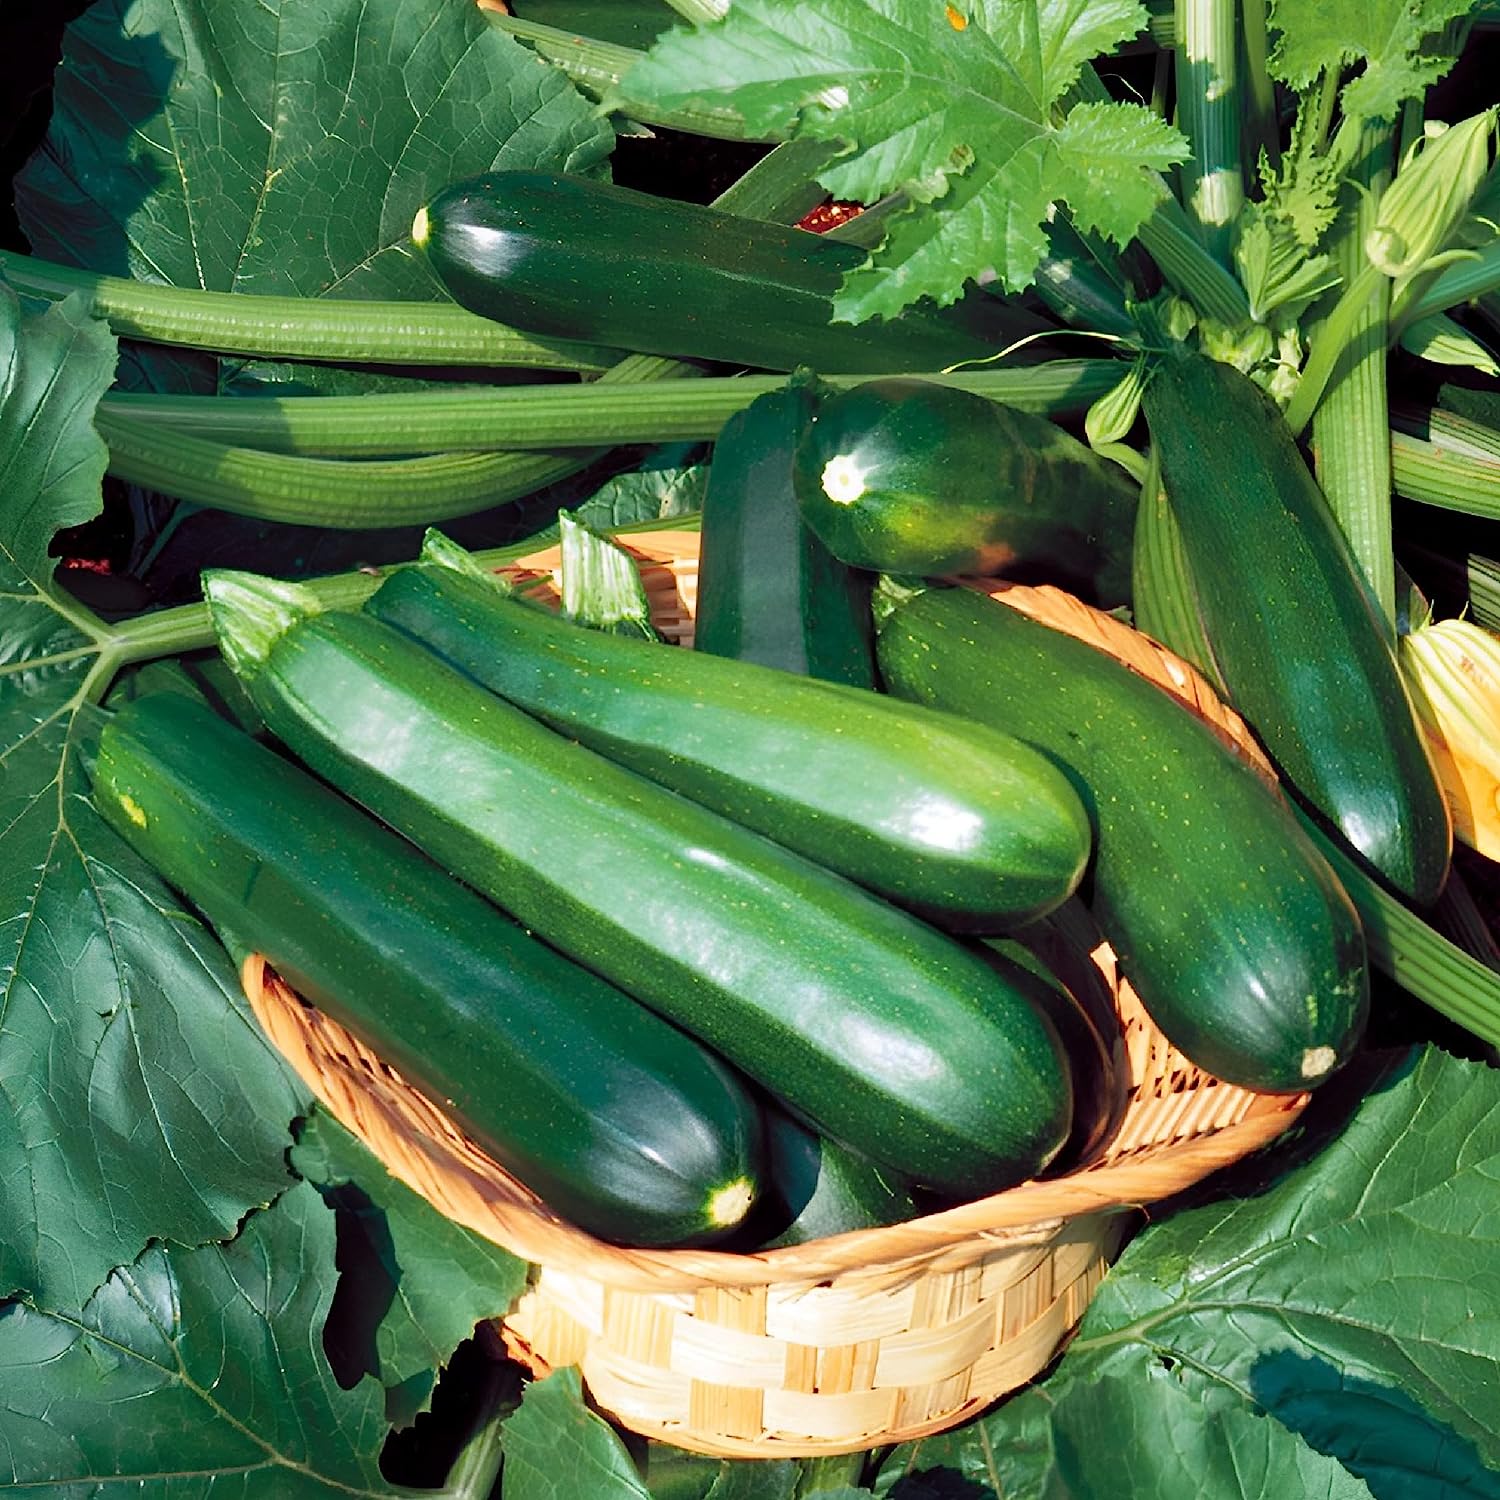 25 Black Zucchini Seeds for Gardening – Non GMO Heirloom Garden Plants, Seeds & Bulbs – Plant Seeds Zucchini Organic Fresh – Organic Zucchini Fresh Seeds – Seeds for Planting Vegetables and Fruits